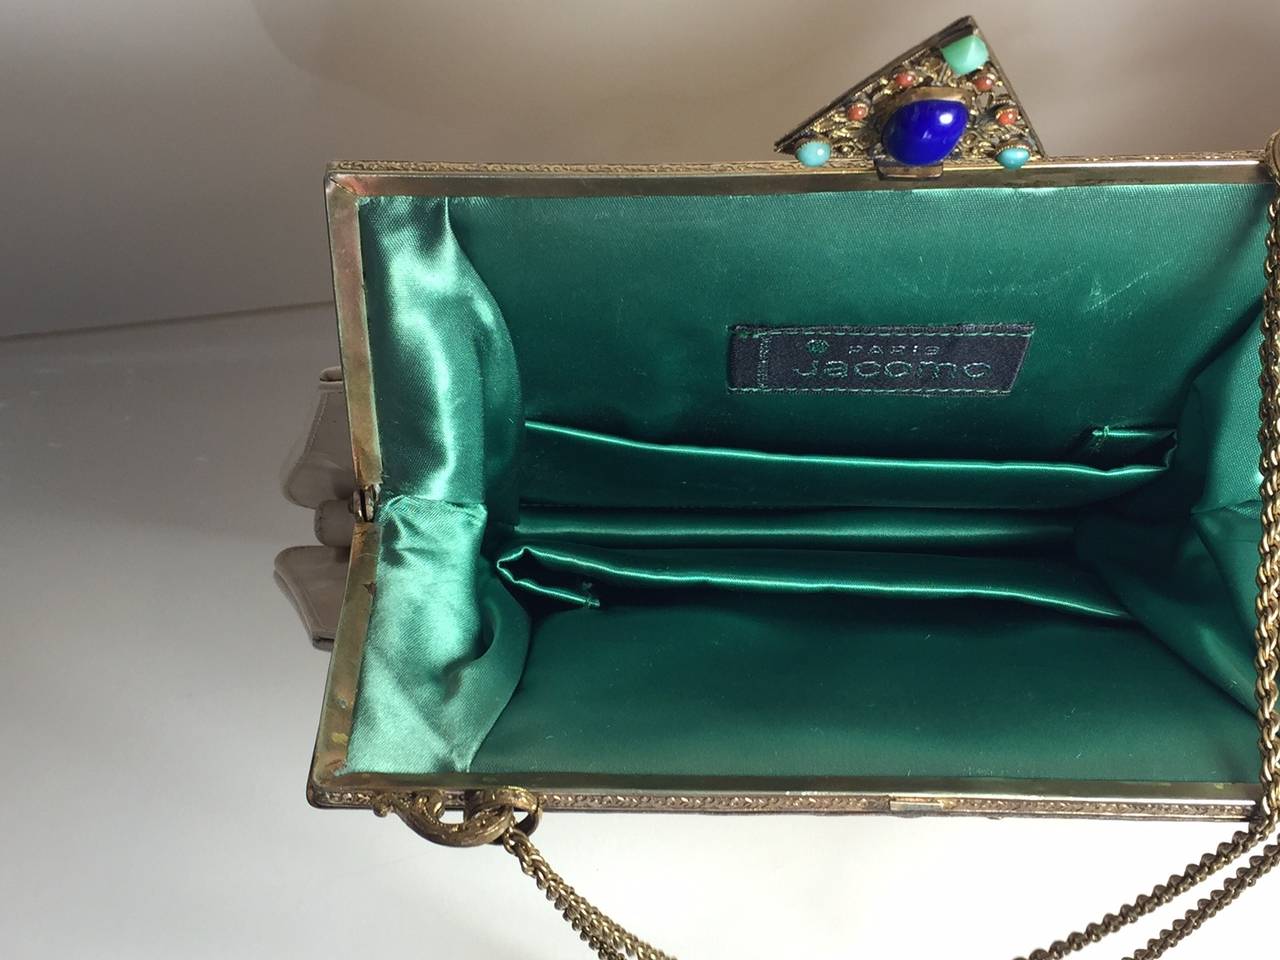 Women's Jacomo Antique Frame Bag with 1980s Restyling